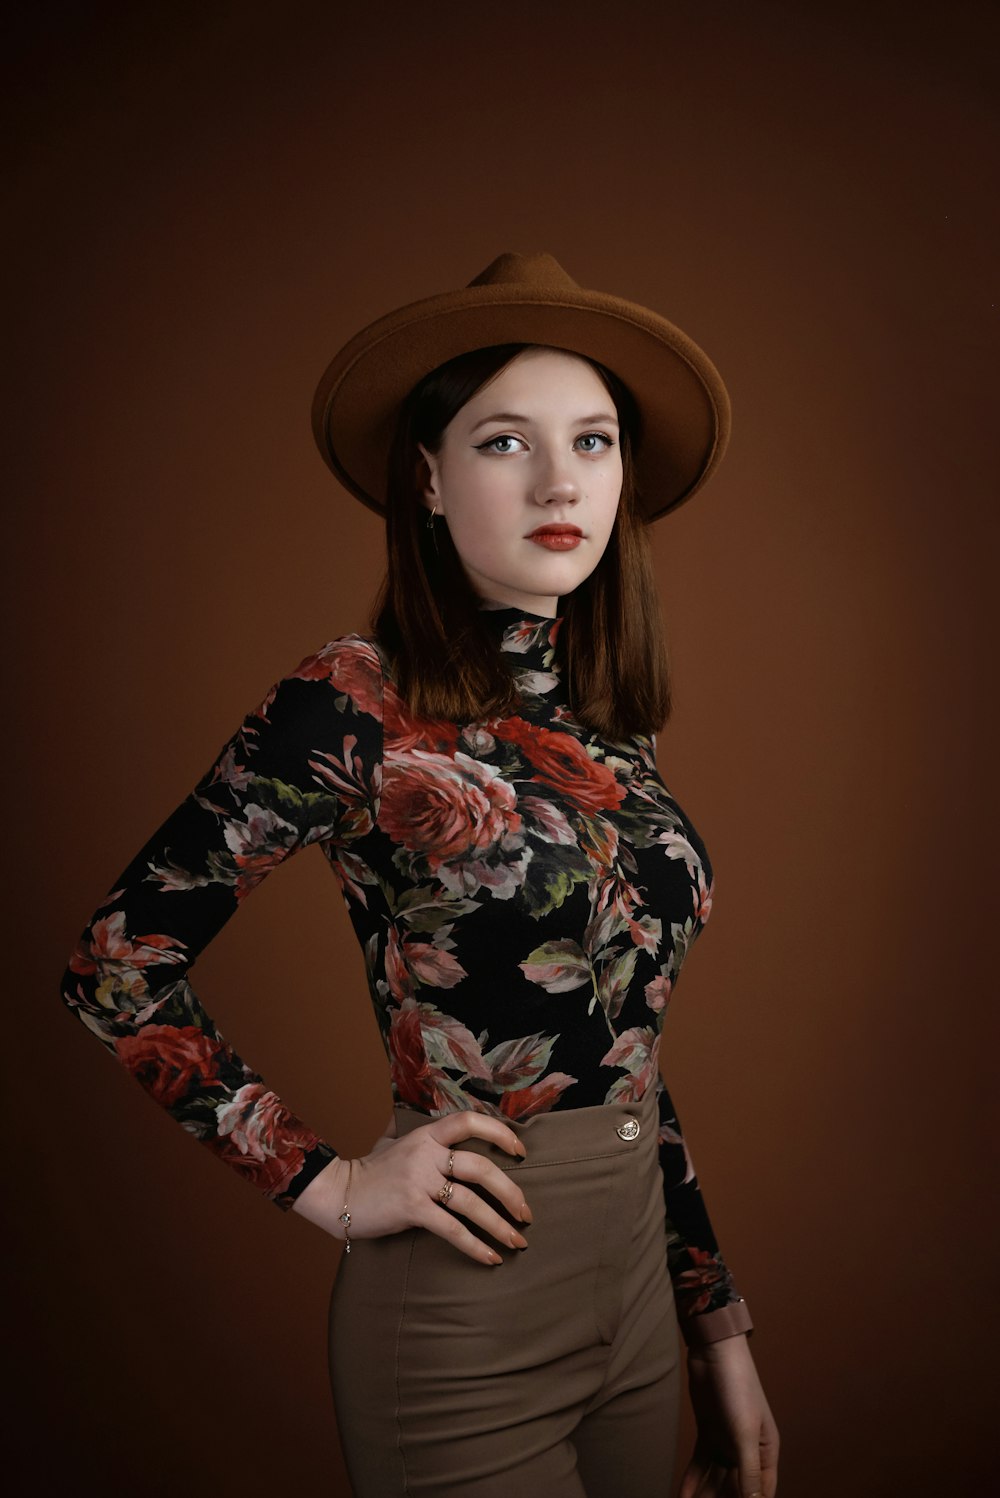 a woman wearing a brown hat and a floral shirt